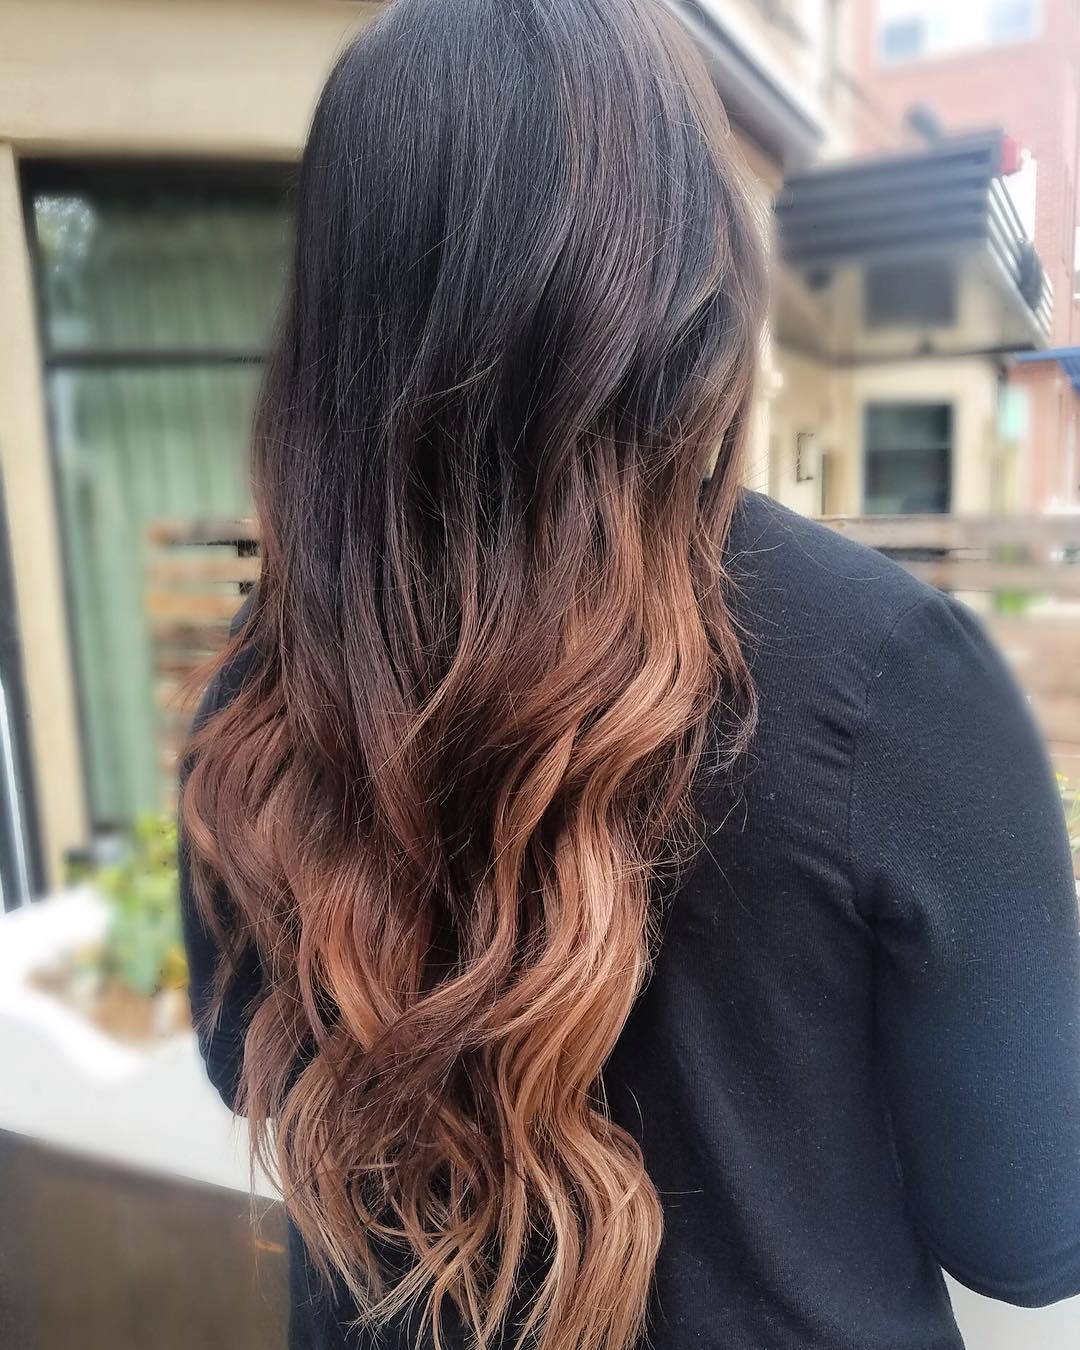 Best Ombré and Balayage Hairstyles 